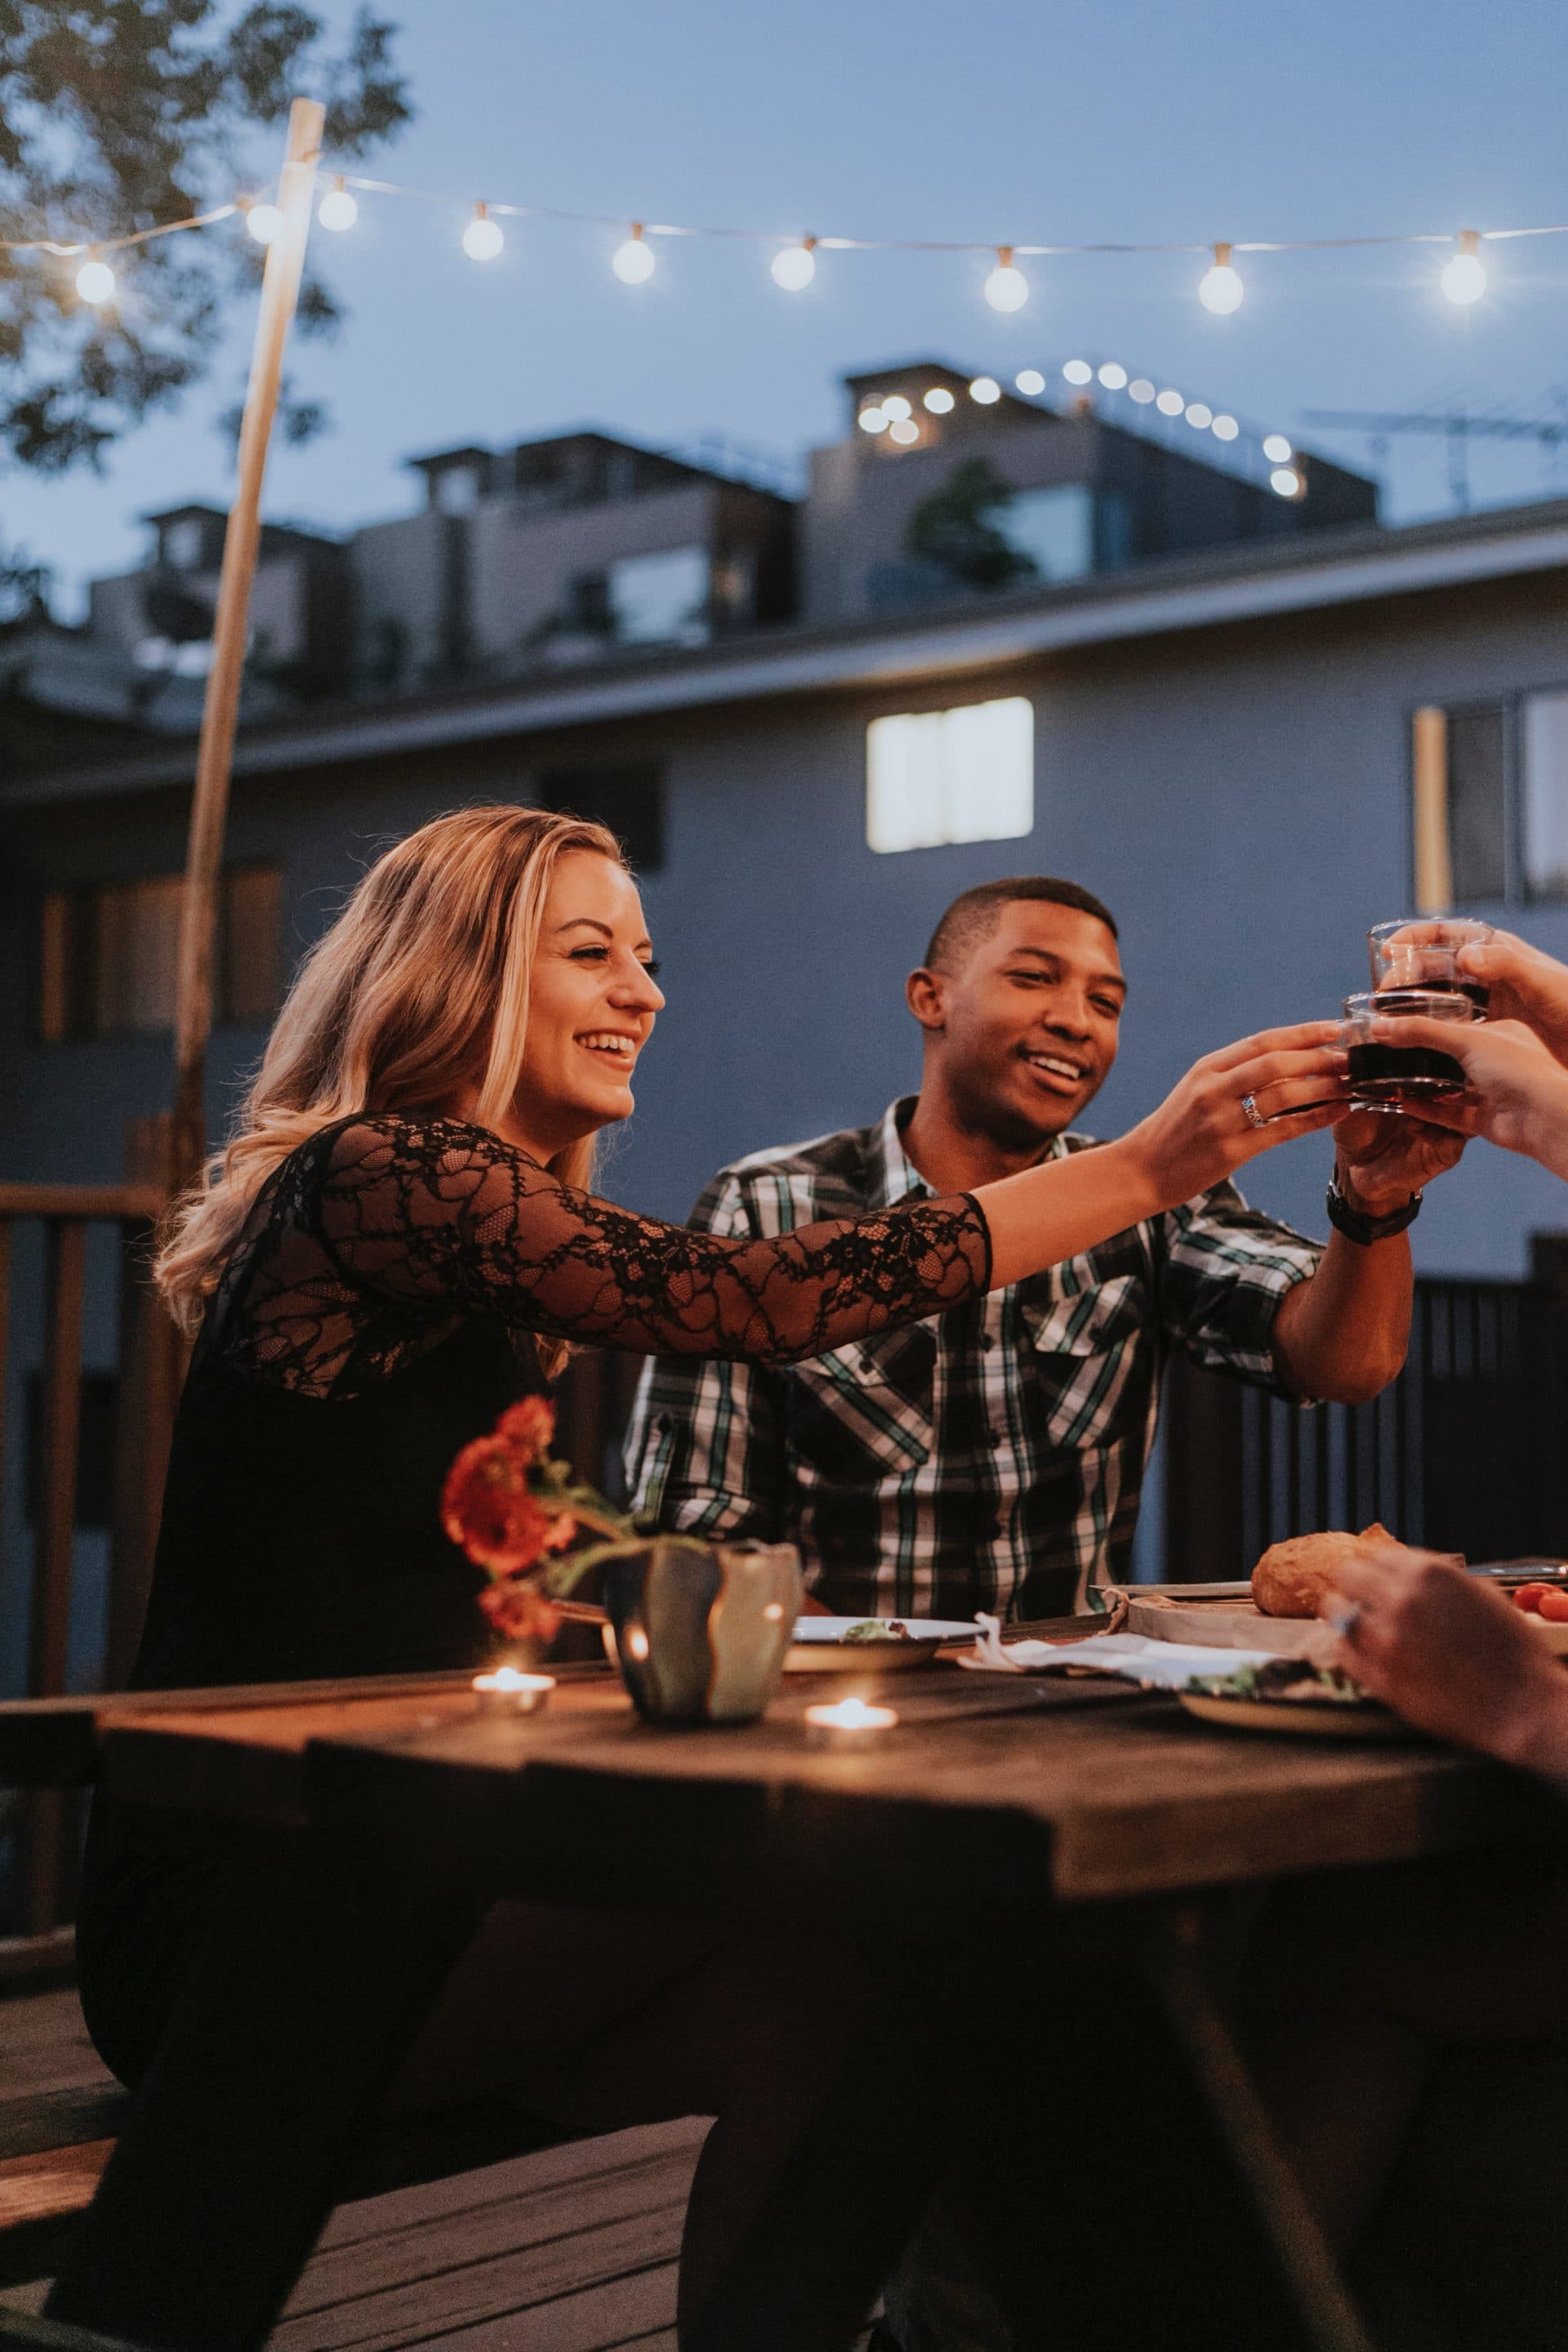 Seasonal Landscape can make your parties better with these top 4 outdoor features for outdoor parties.